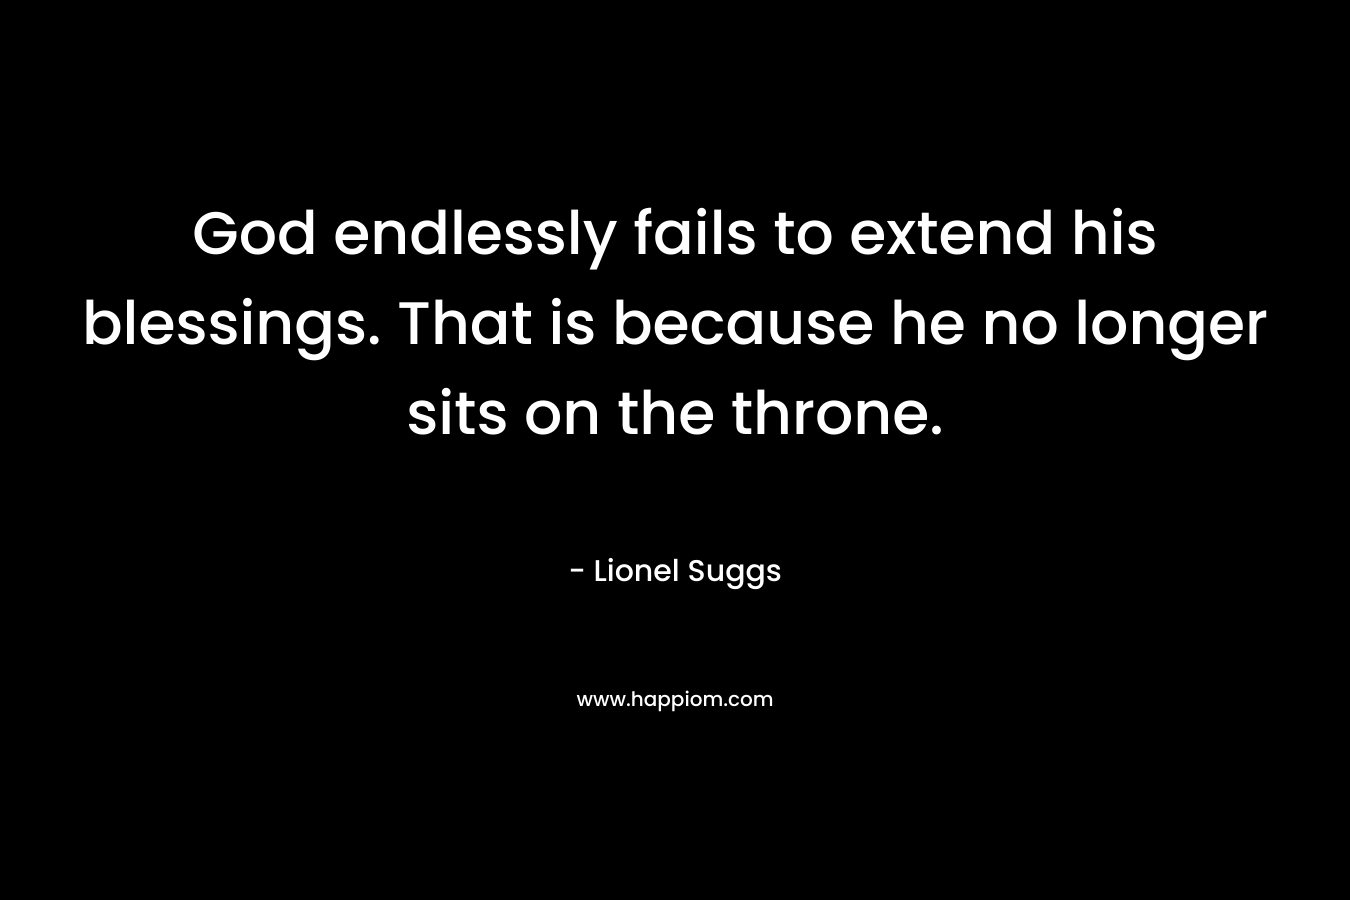 God endlessly fails to extend his blessings. That is because he no longer sits on the throne.